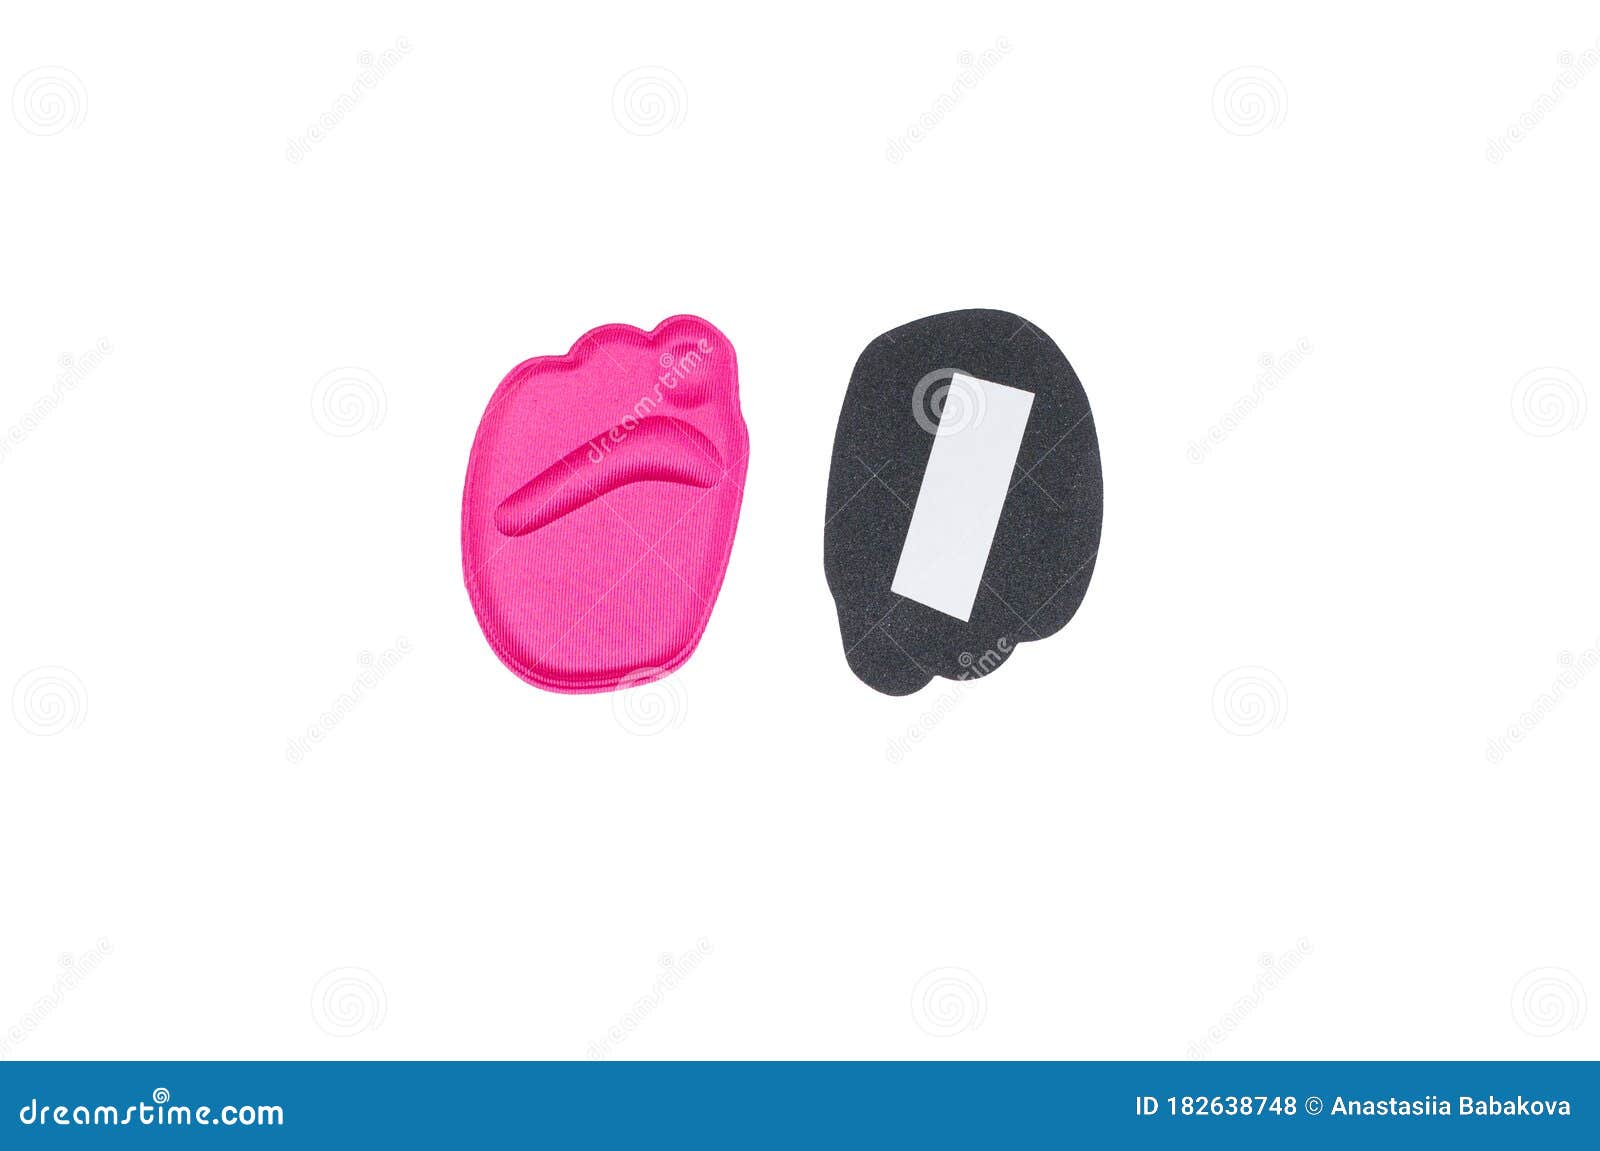 soft orthopedic insert for the forefoot under fingers in shoes  on a white background.